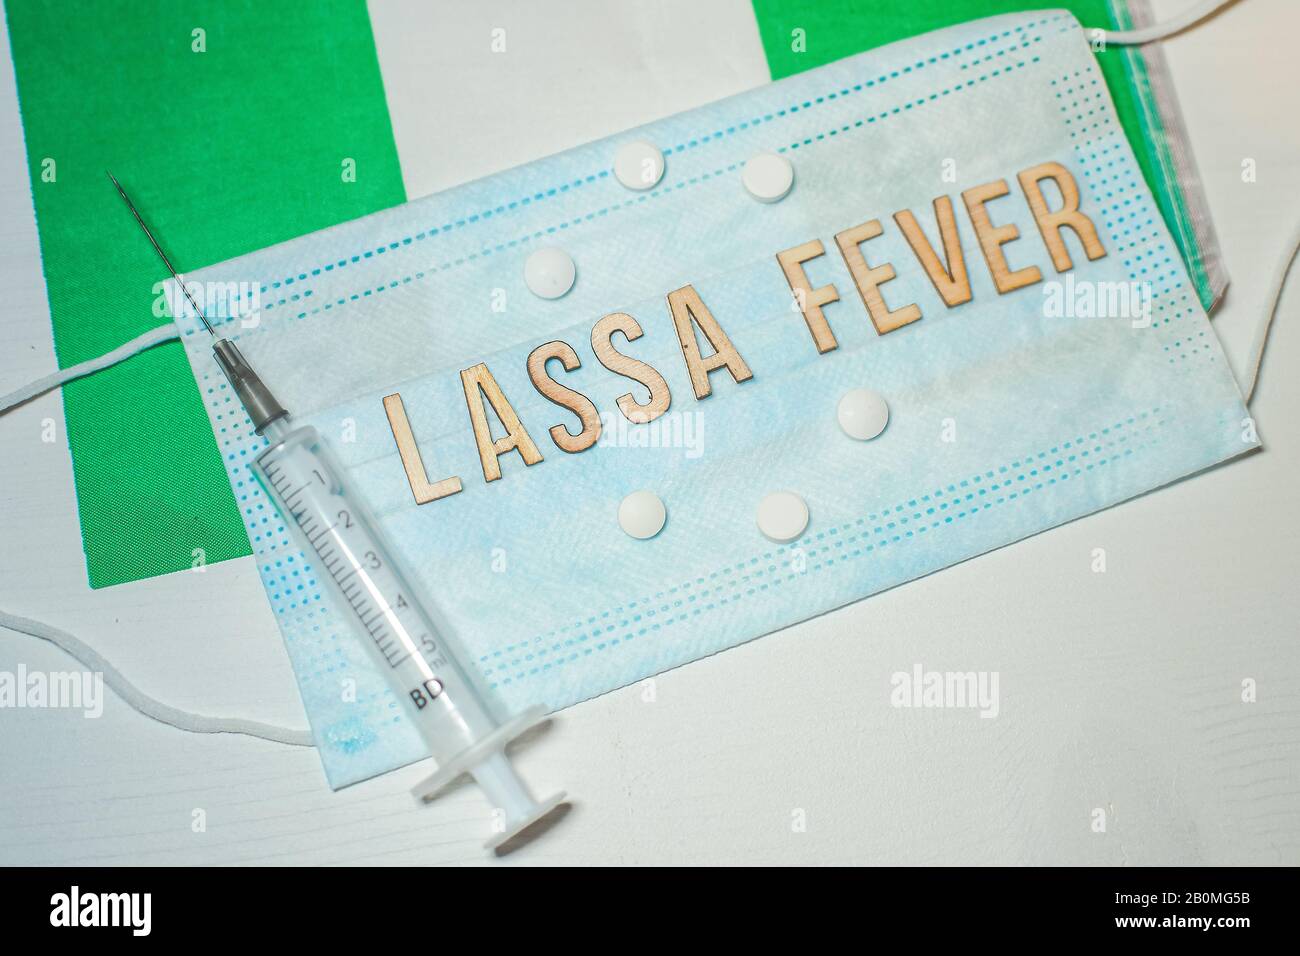 Nigerian flag under words Lassa fever outbreak concept. protective breathing mask and syringe. Lassa hemorrhagic fever LHF endemic in West Africa incl Stock Photo